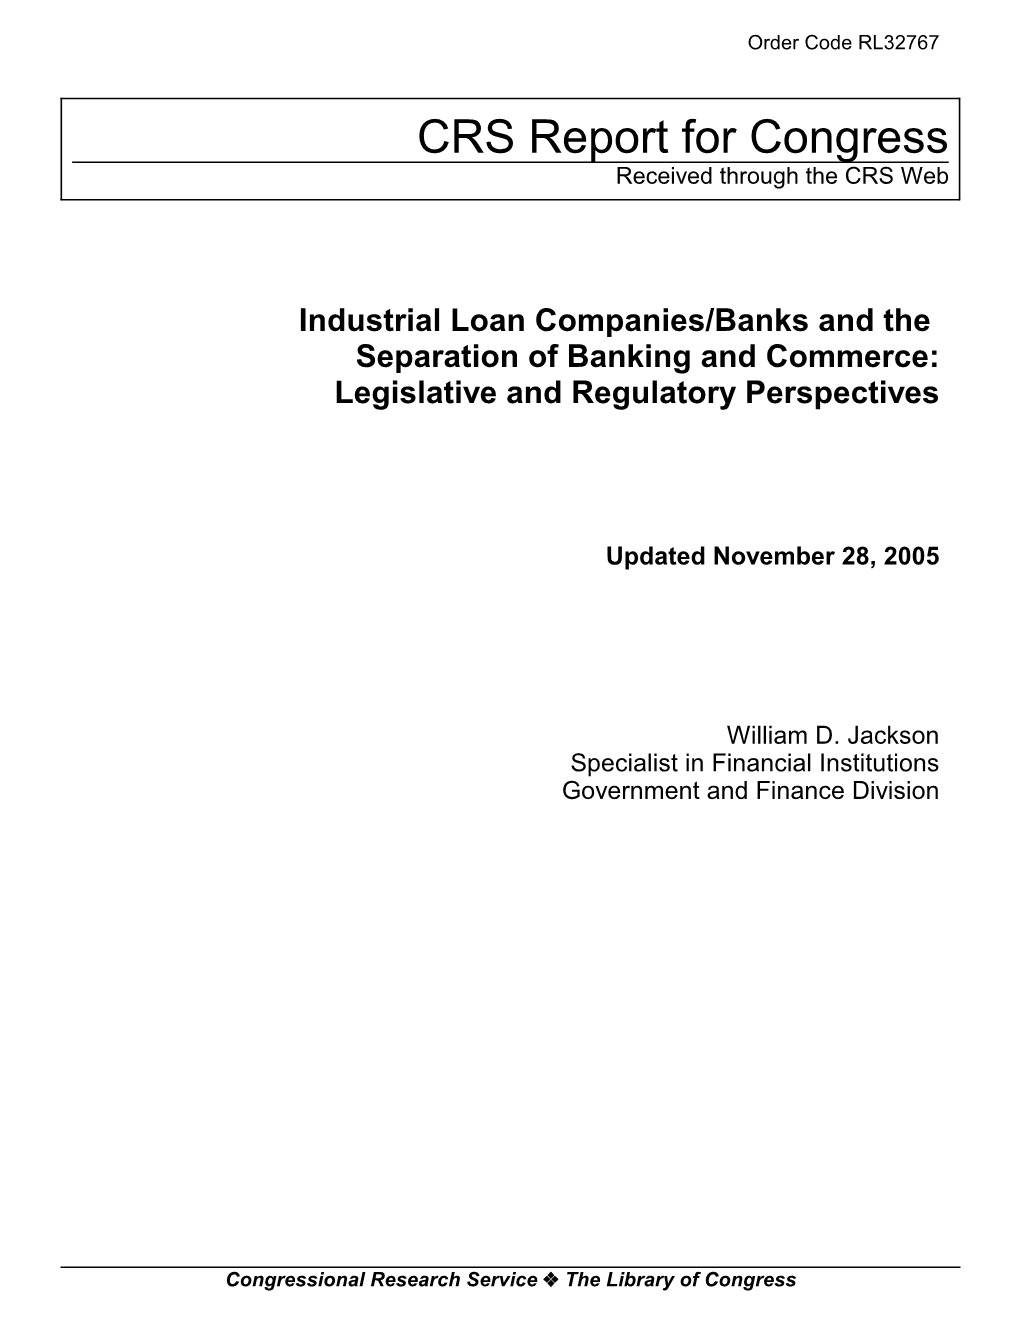 Industrial Loan Companies/Banks and the Separation of Banking and Commerce: Legislative and Regulatory Perspectives